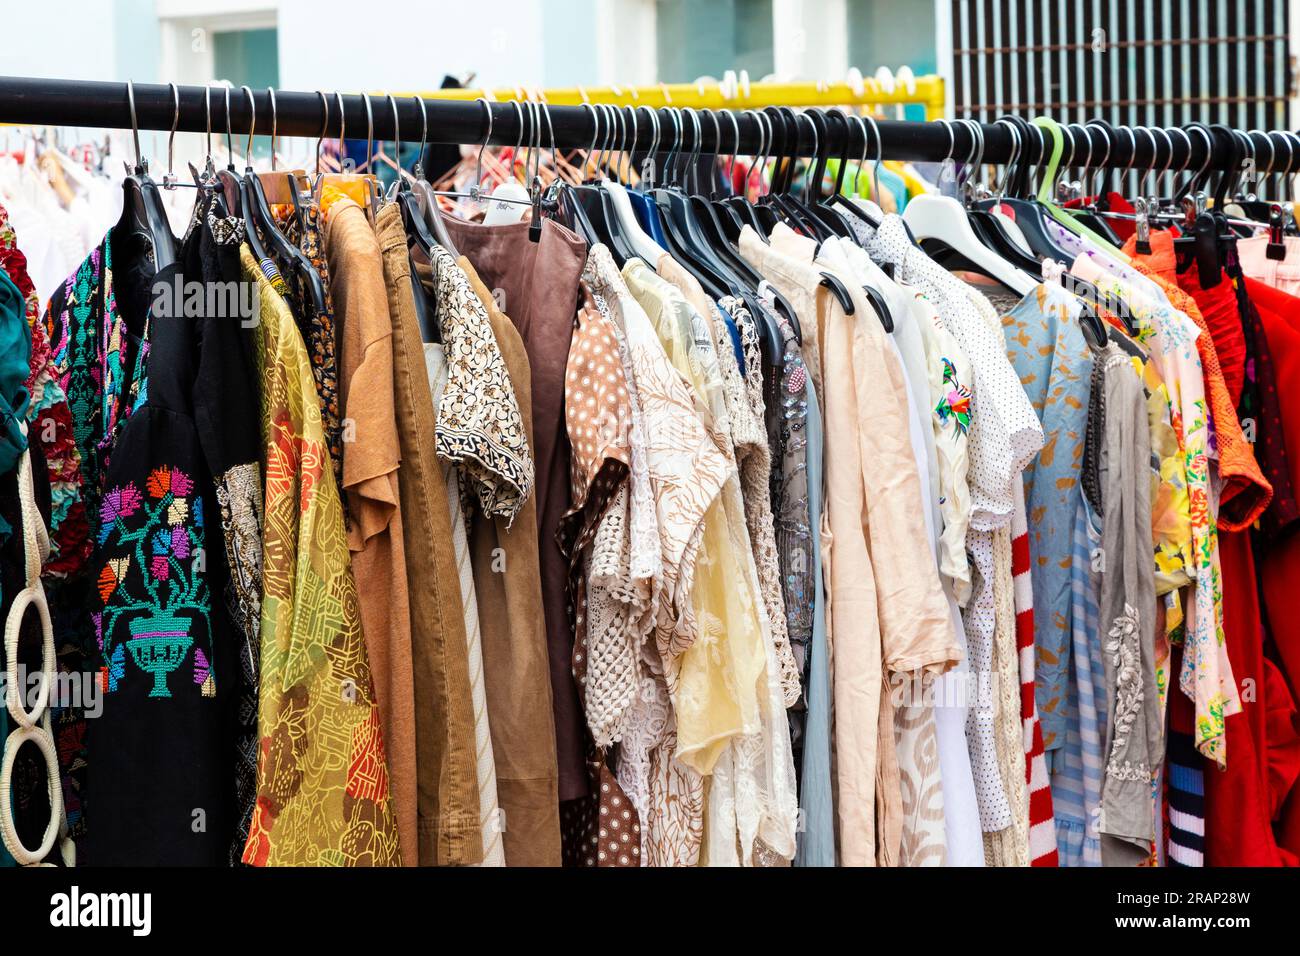 Rail with vintage, second hand clothing at Upper Gardner Street Market, Brighton, England Stock Photo